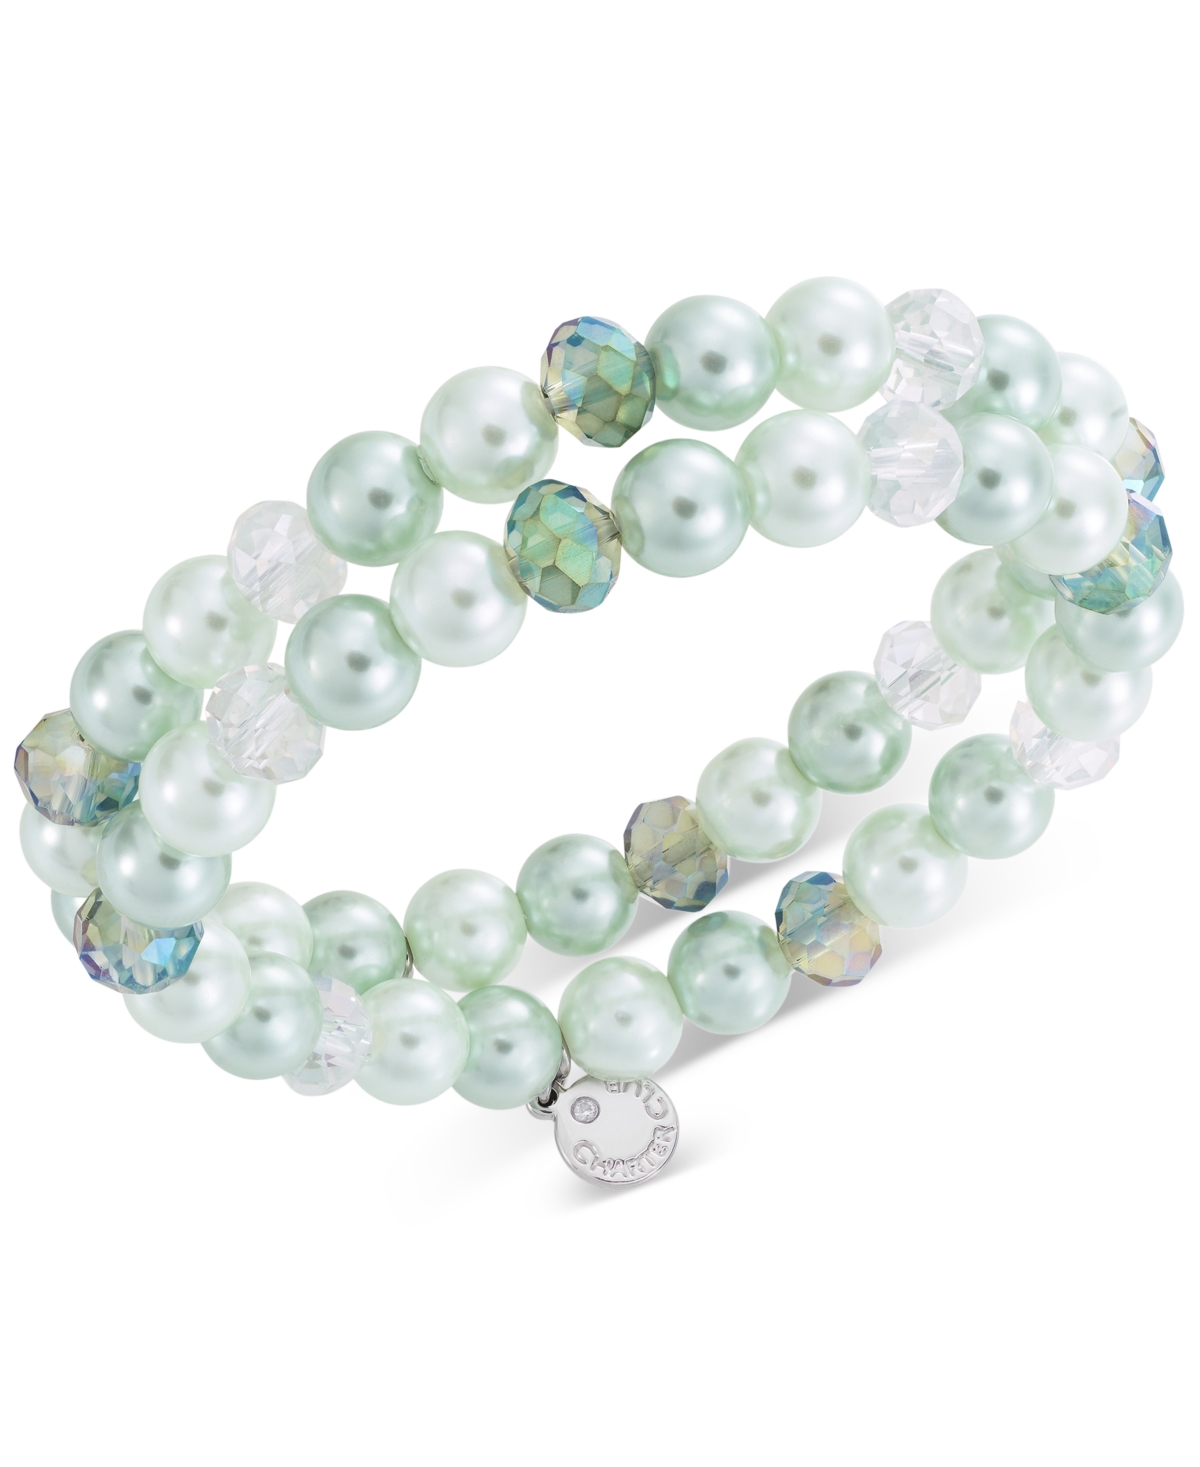 Silver-Tone 2-Pc. Set Beaded Stretch Bracelets, Created for Macy's - Green